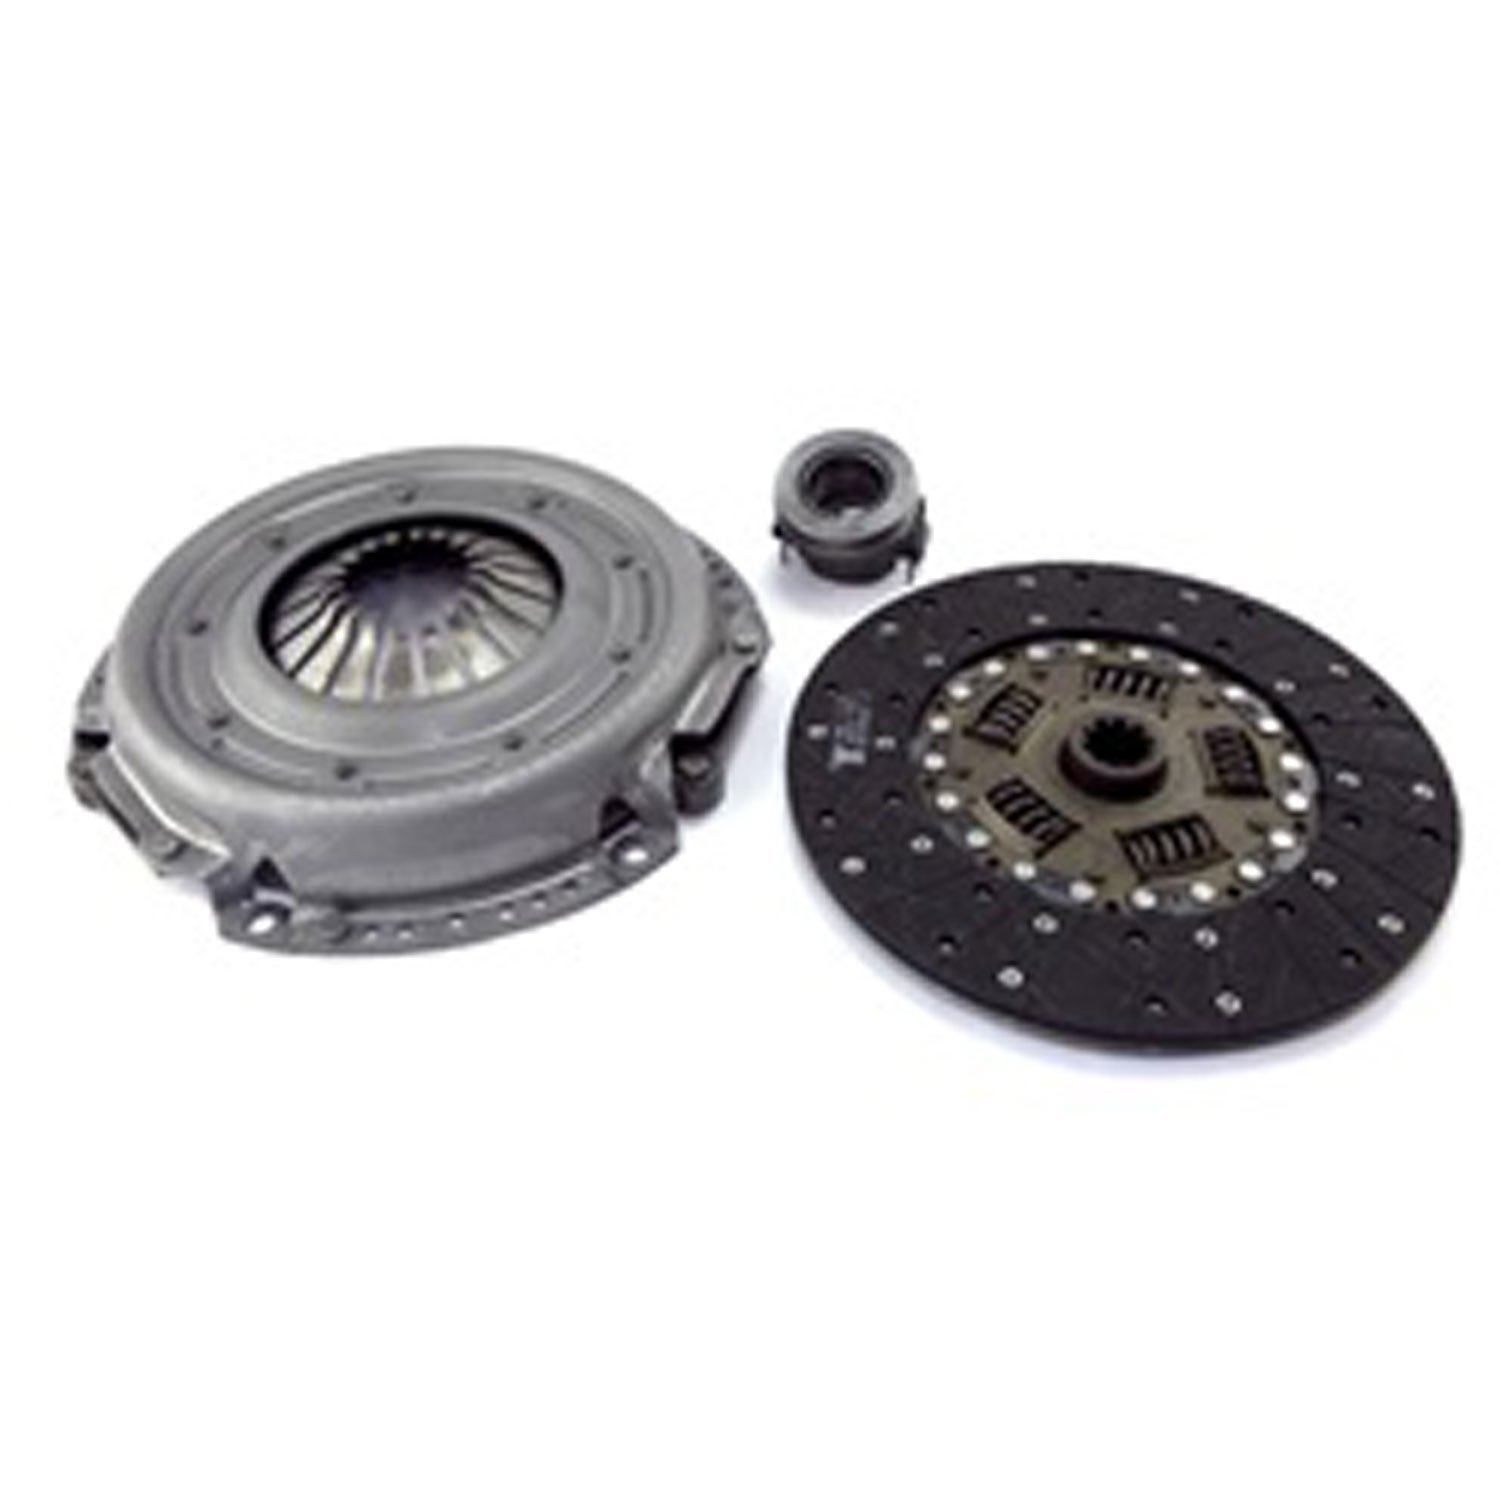 Regular clutch kit fits 97-06 Jeep Wranglers with a 4.0L engine. The regular clutch kit includes the